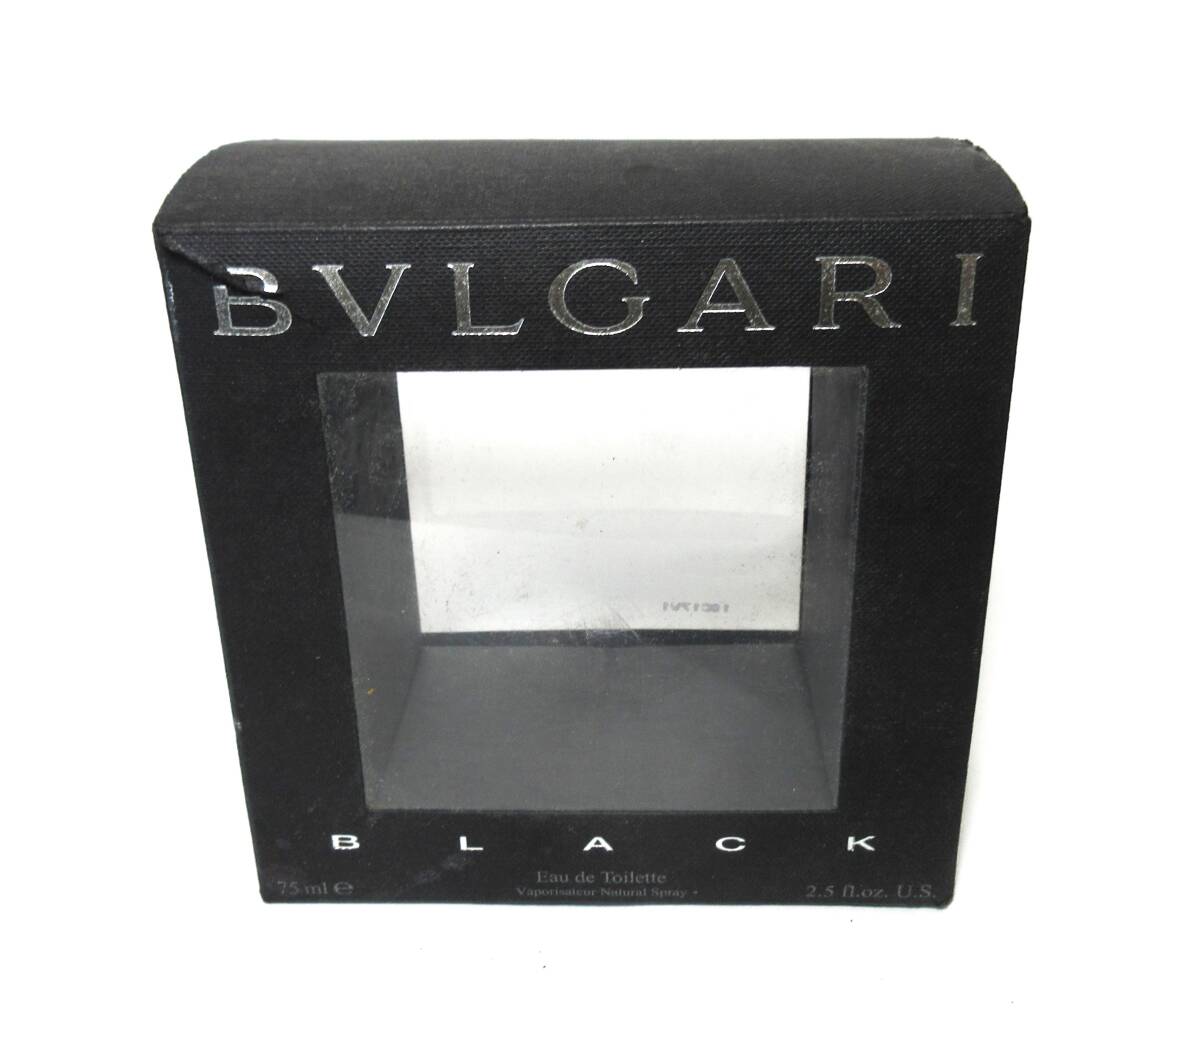  BVLGARY black o-doto crack 75ml Italy made BVLGARI BLACK unused * Okayama shipping *( Hiroshima shipping goods including in a package un- possible 